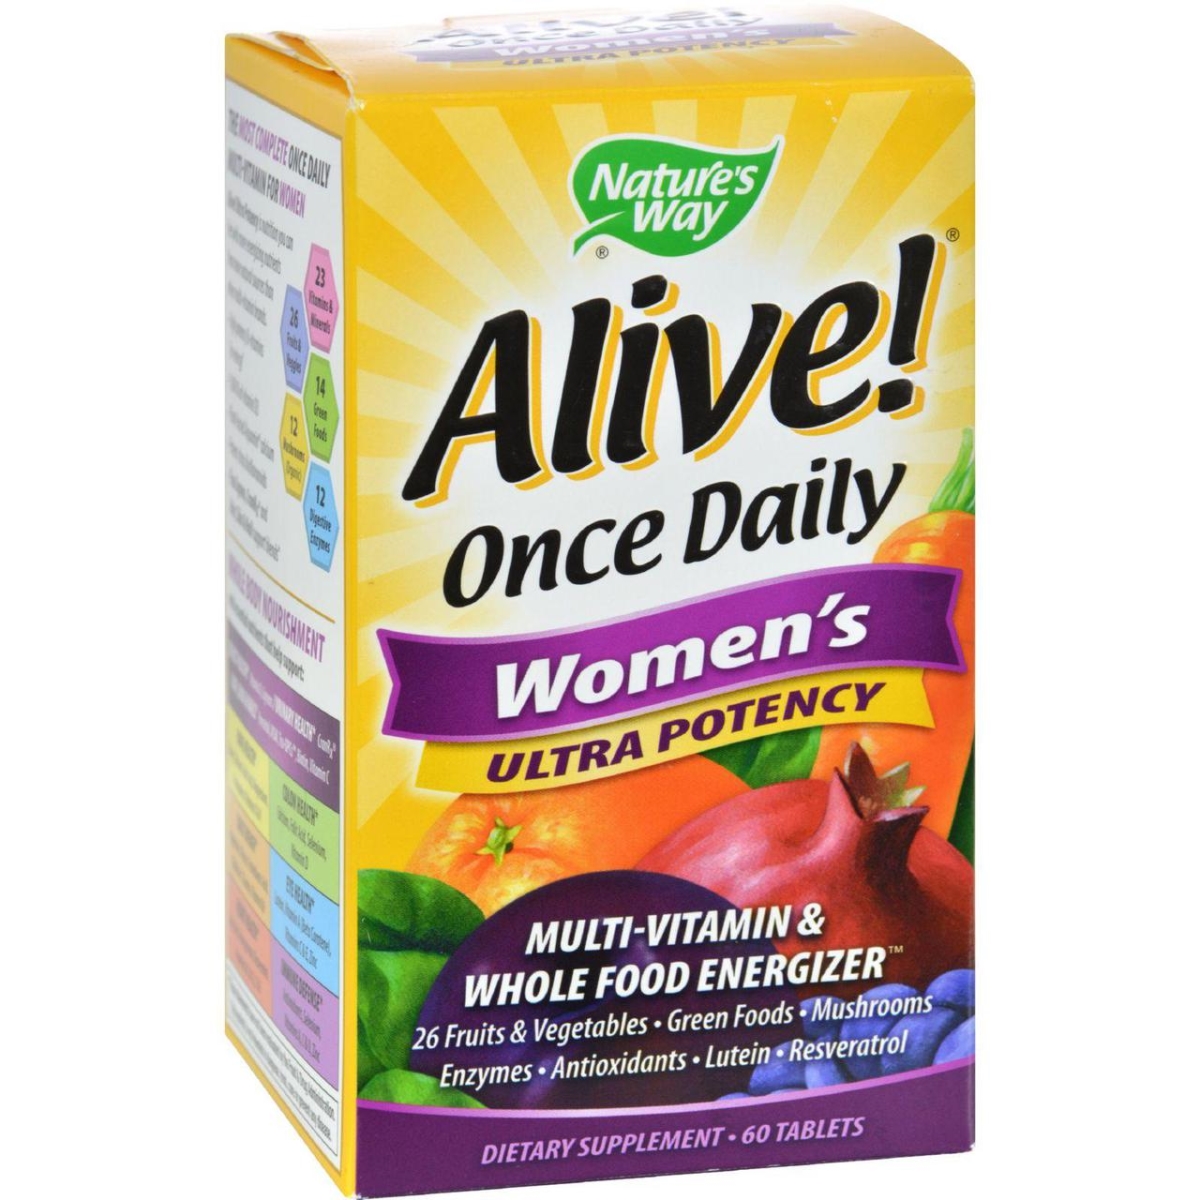 Hg0726547 Alive Once Daily Womens Multi-vitamin Ultra Potency - 60 Tablets